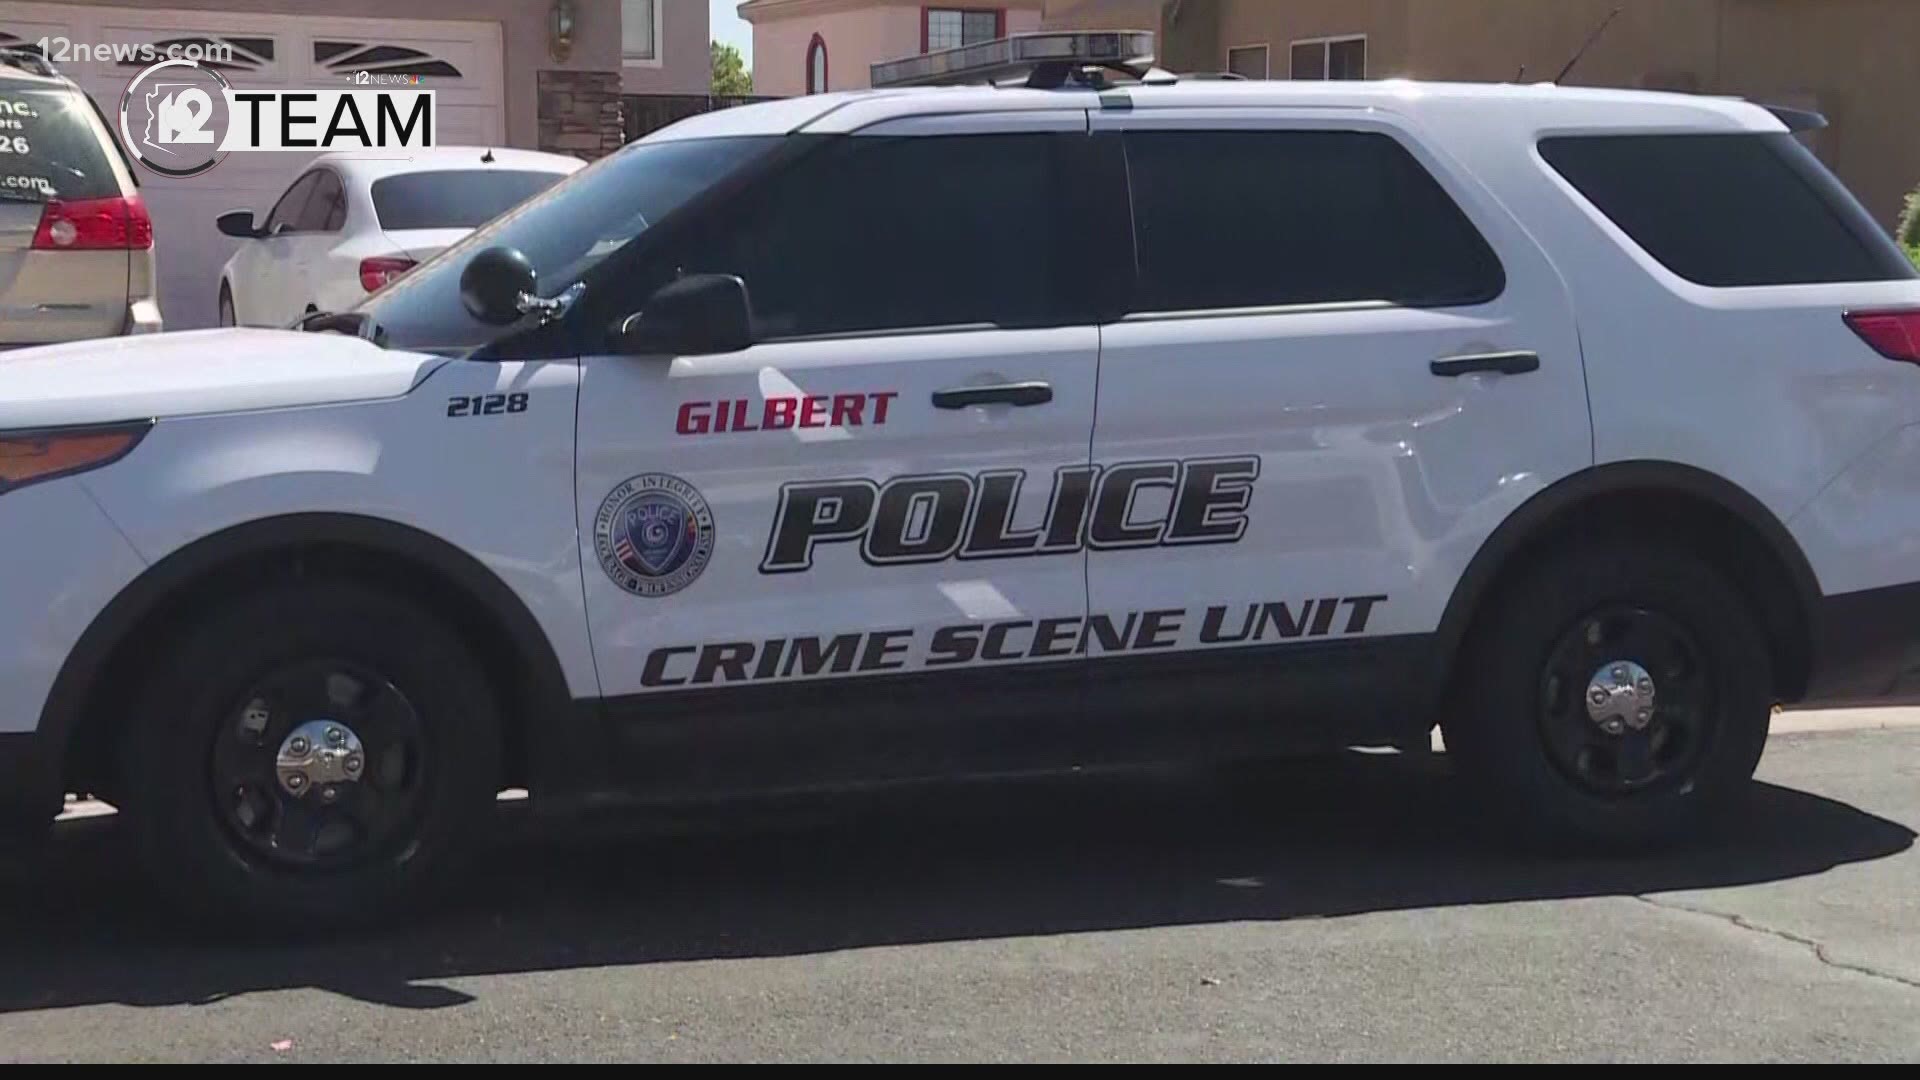 A resident of a group home in Gilbert is accused of killing another resident. Records show the group home had a history of violence leading up to the incident.